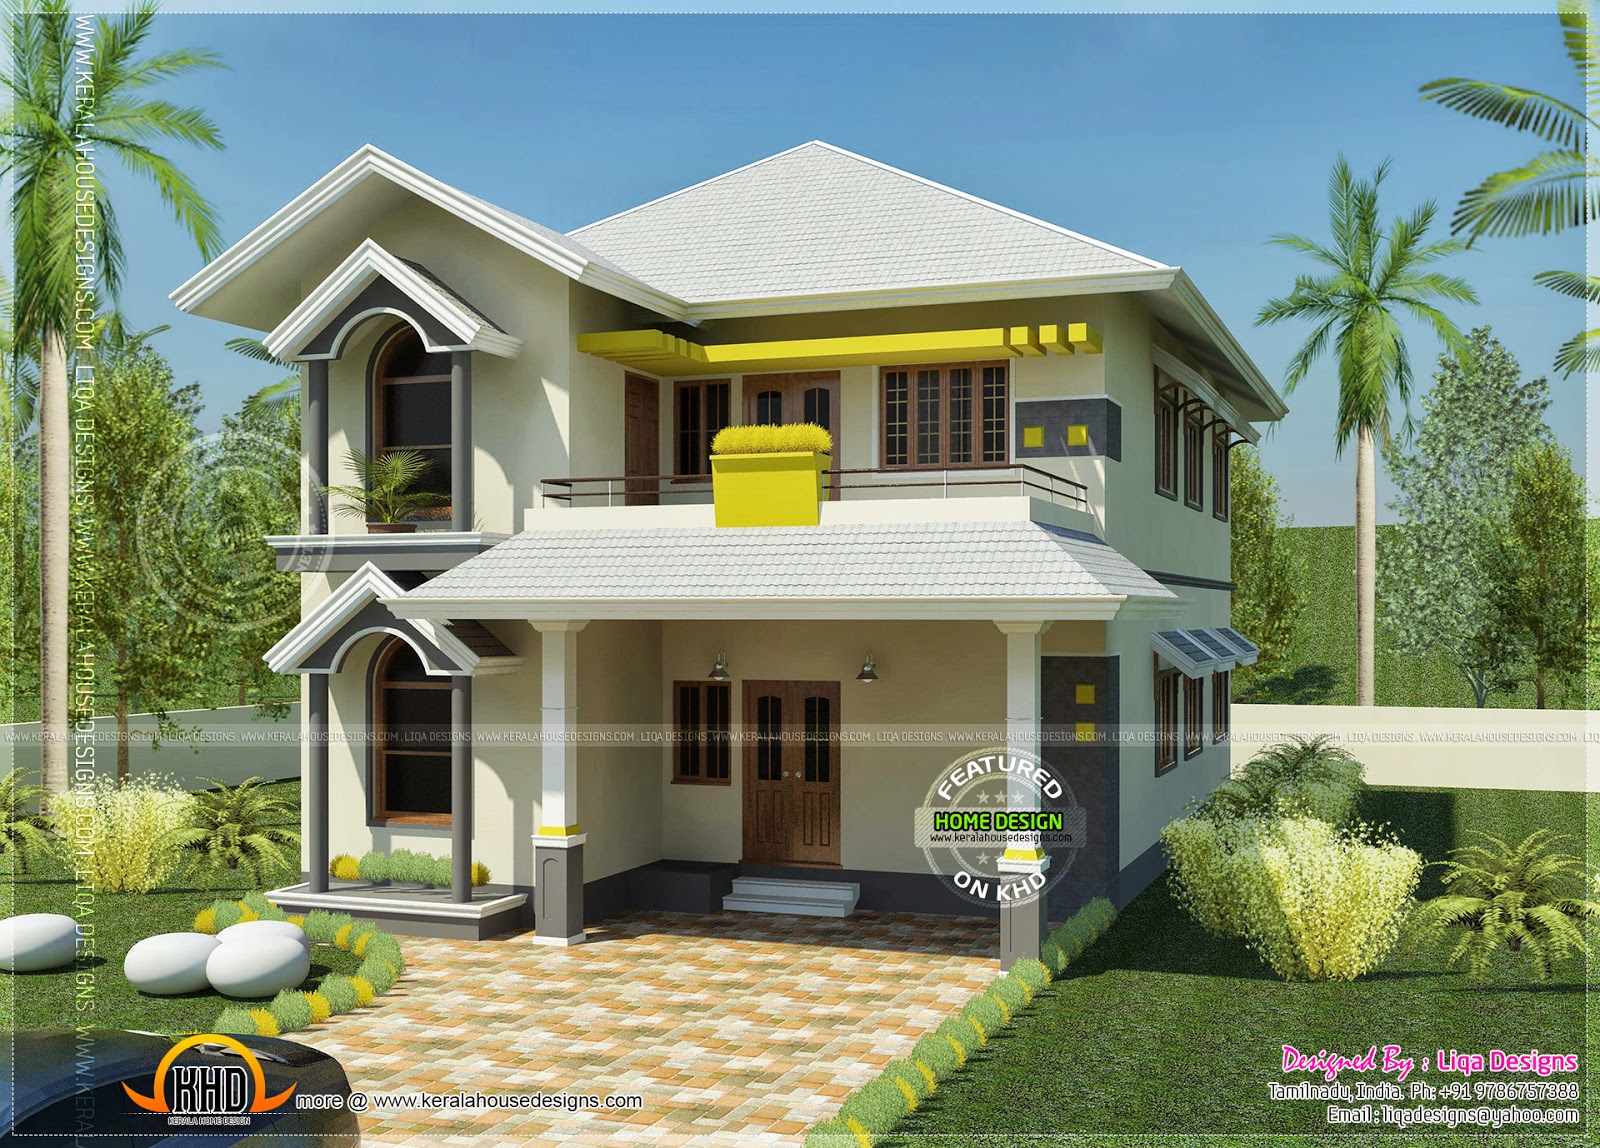  House  South Indian  style in 2378 square feet Home  Kerala 